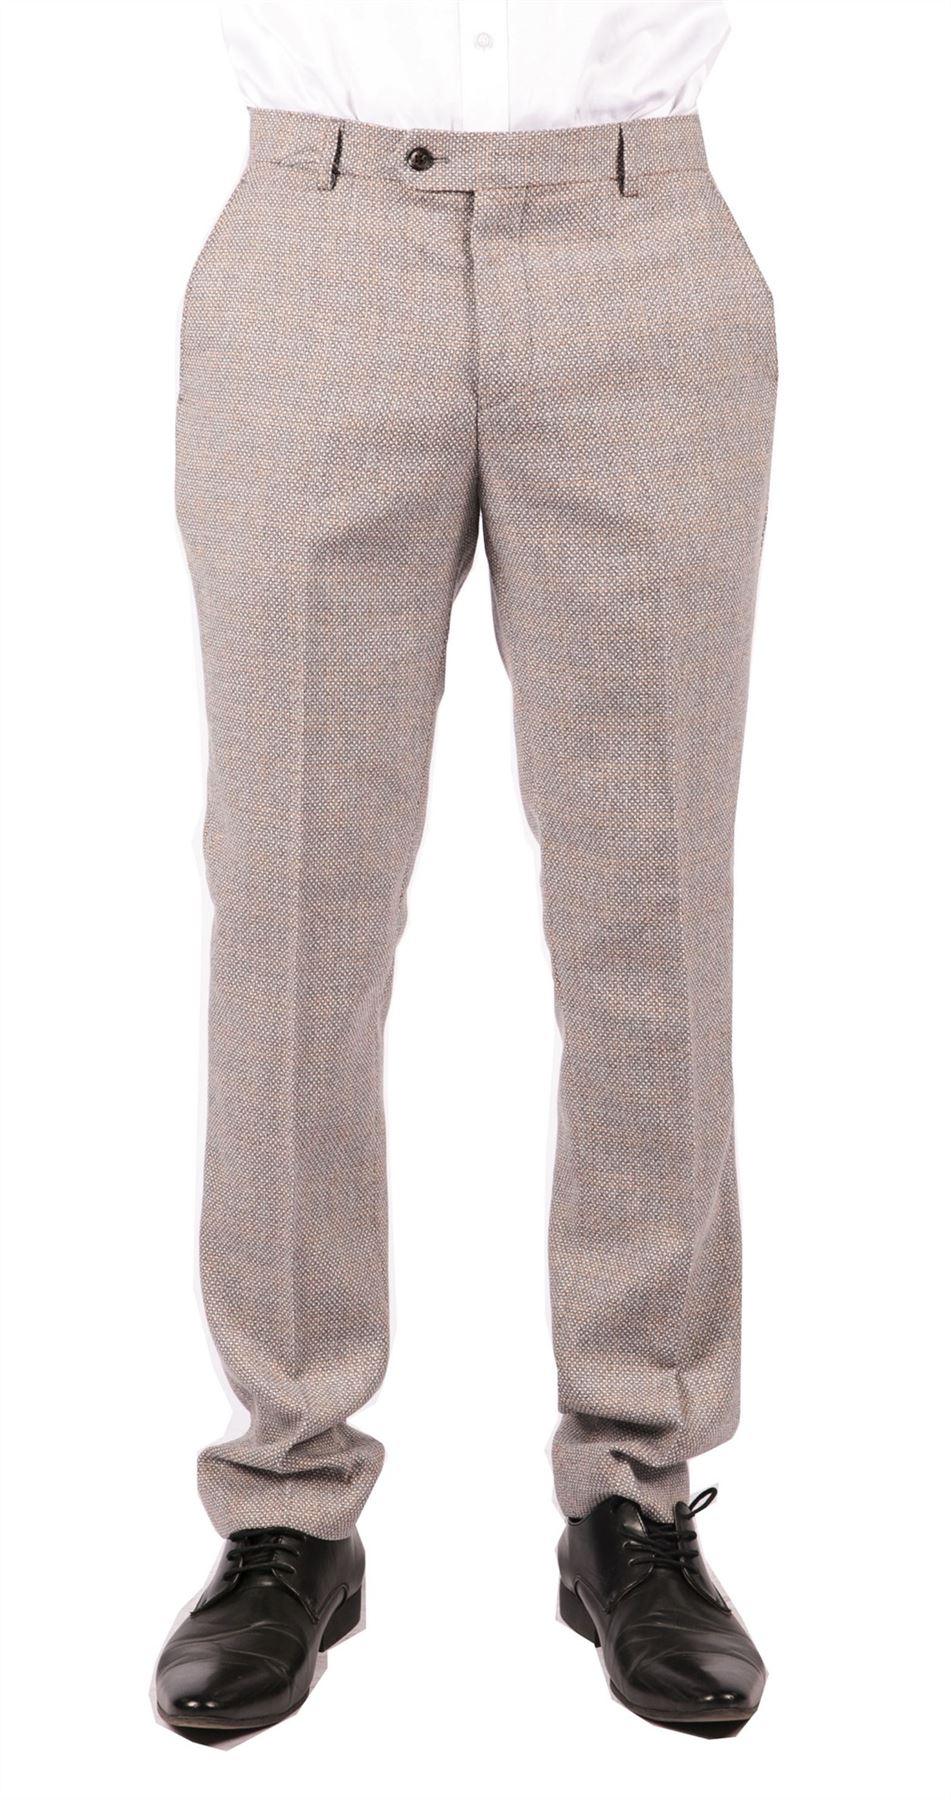 Men's Tailored Fit Tweed Check Trousers Vintage Style 1920s Dress Suit Pants  | eBay